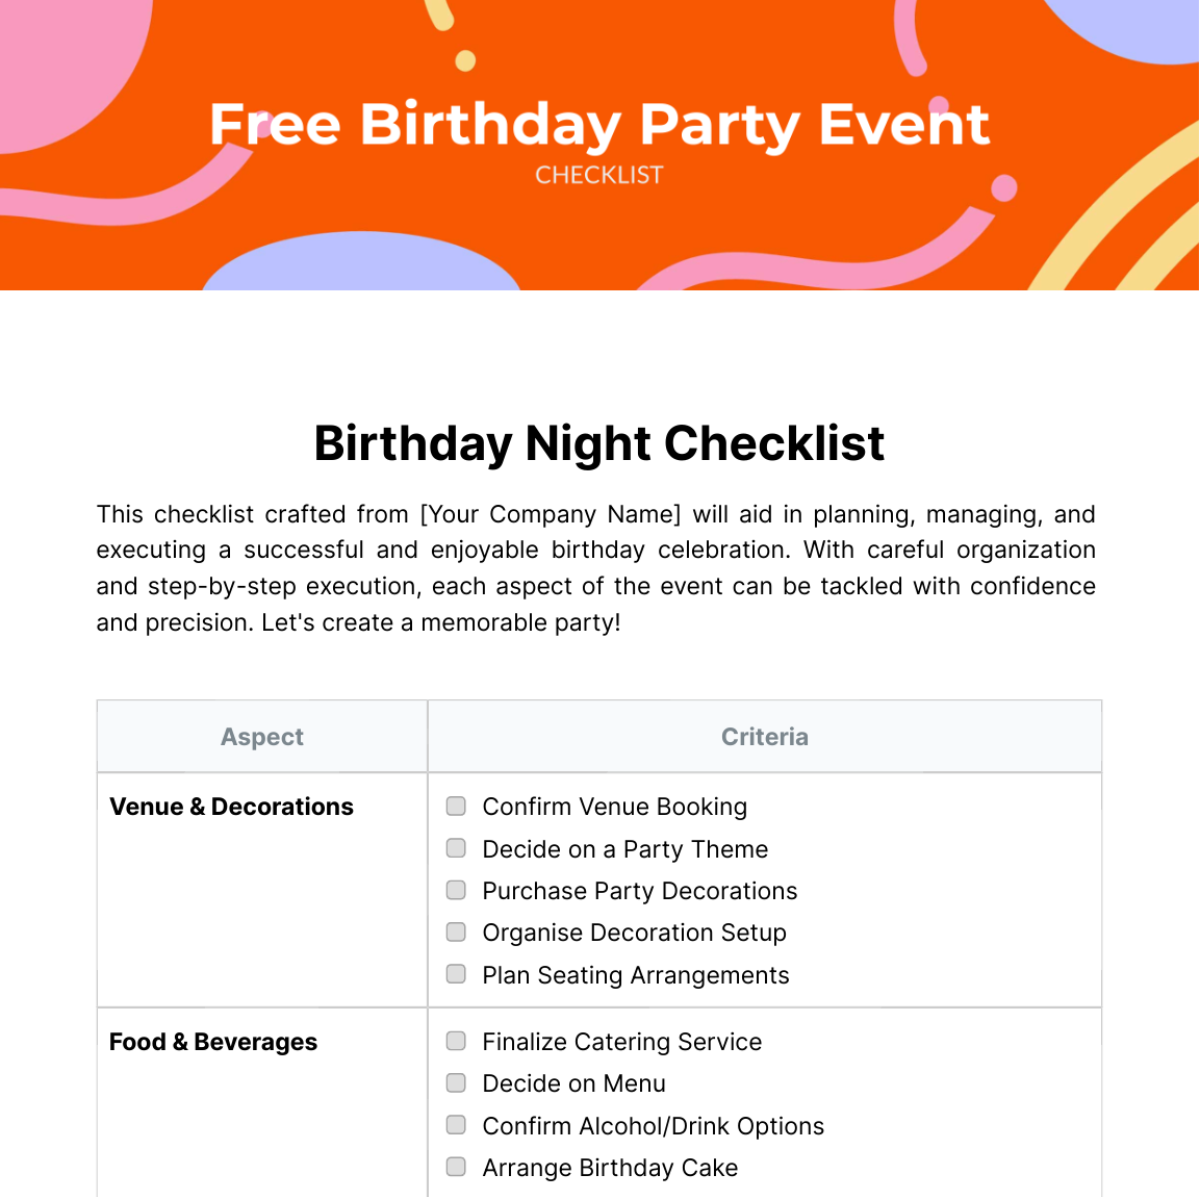 Birthday Party Event Checklist Template